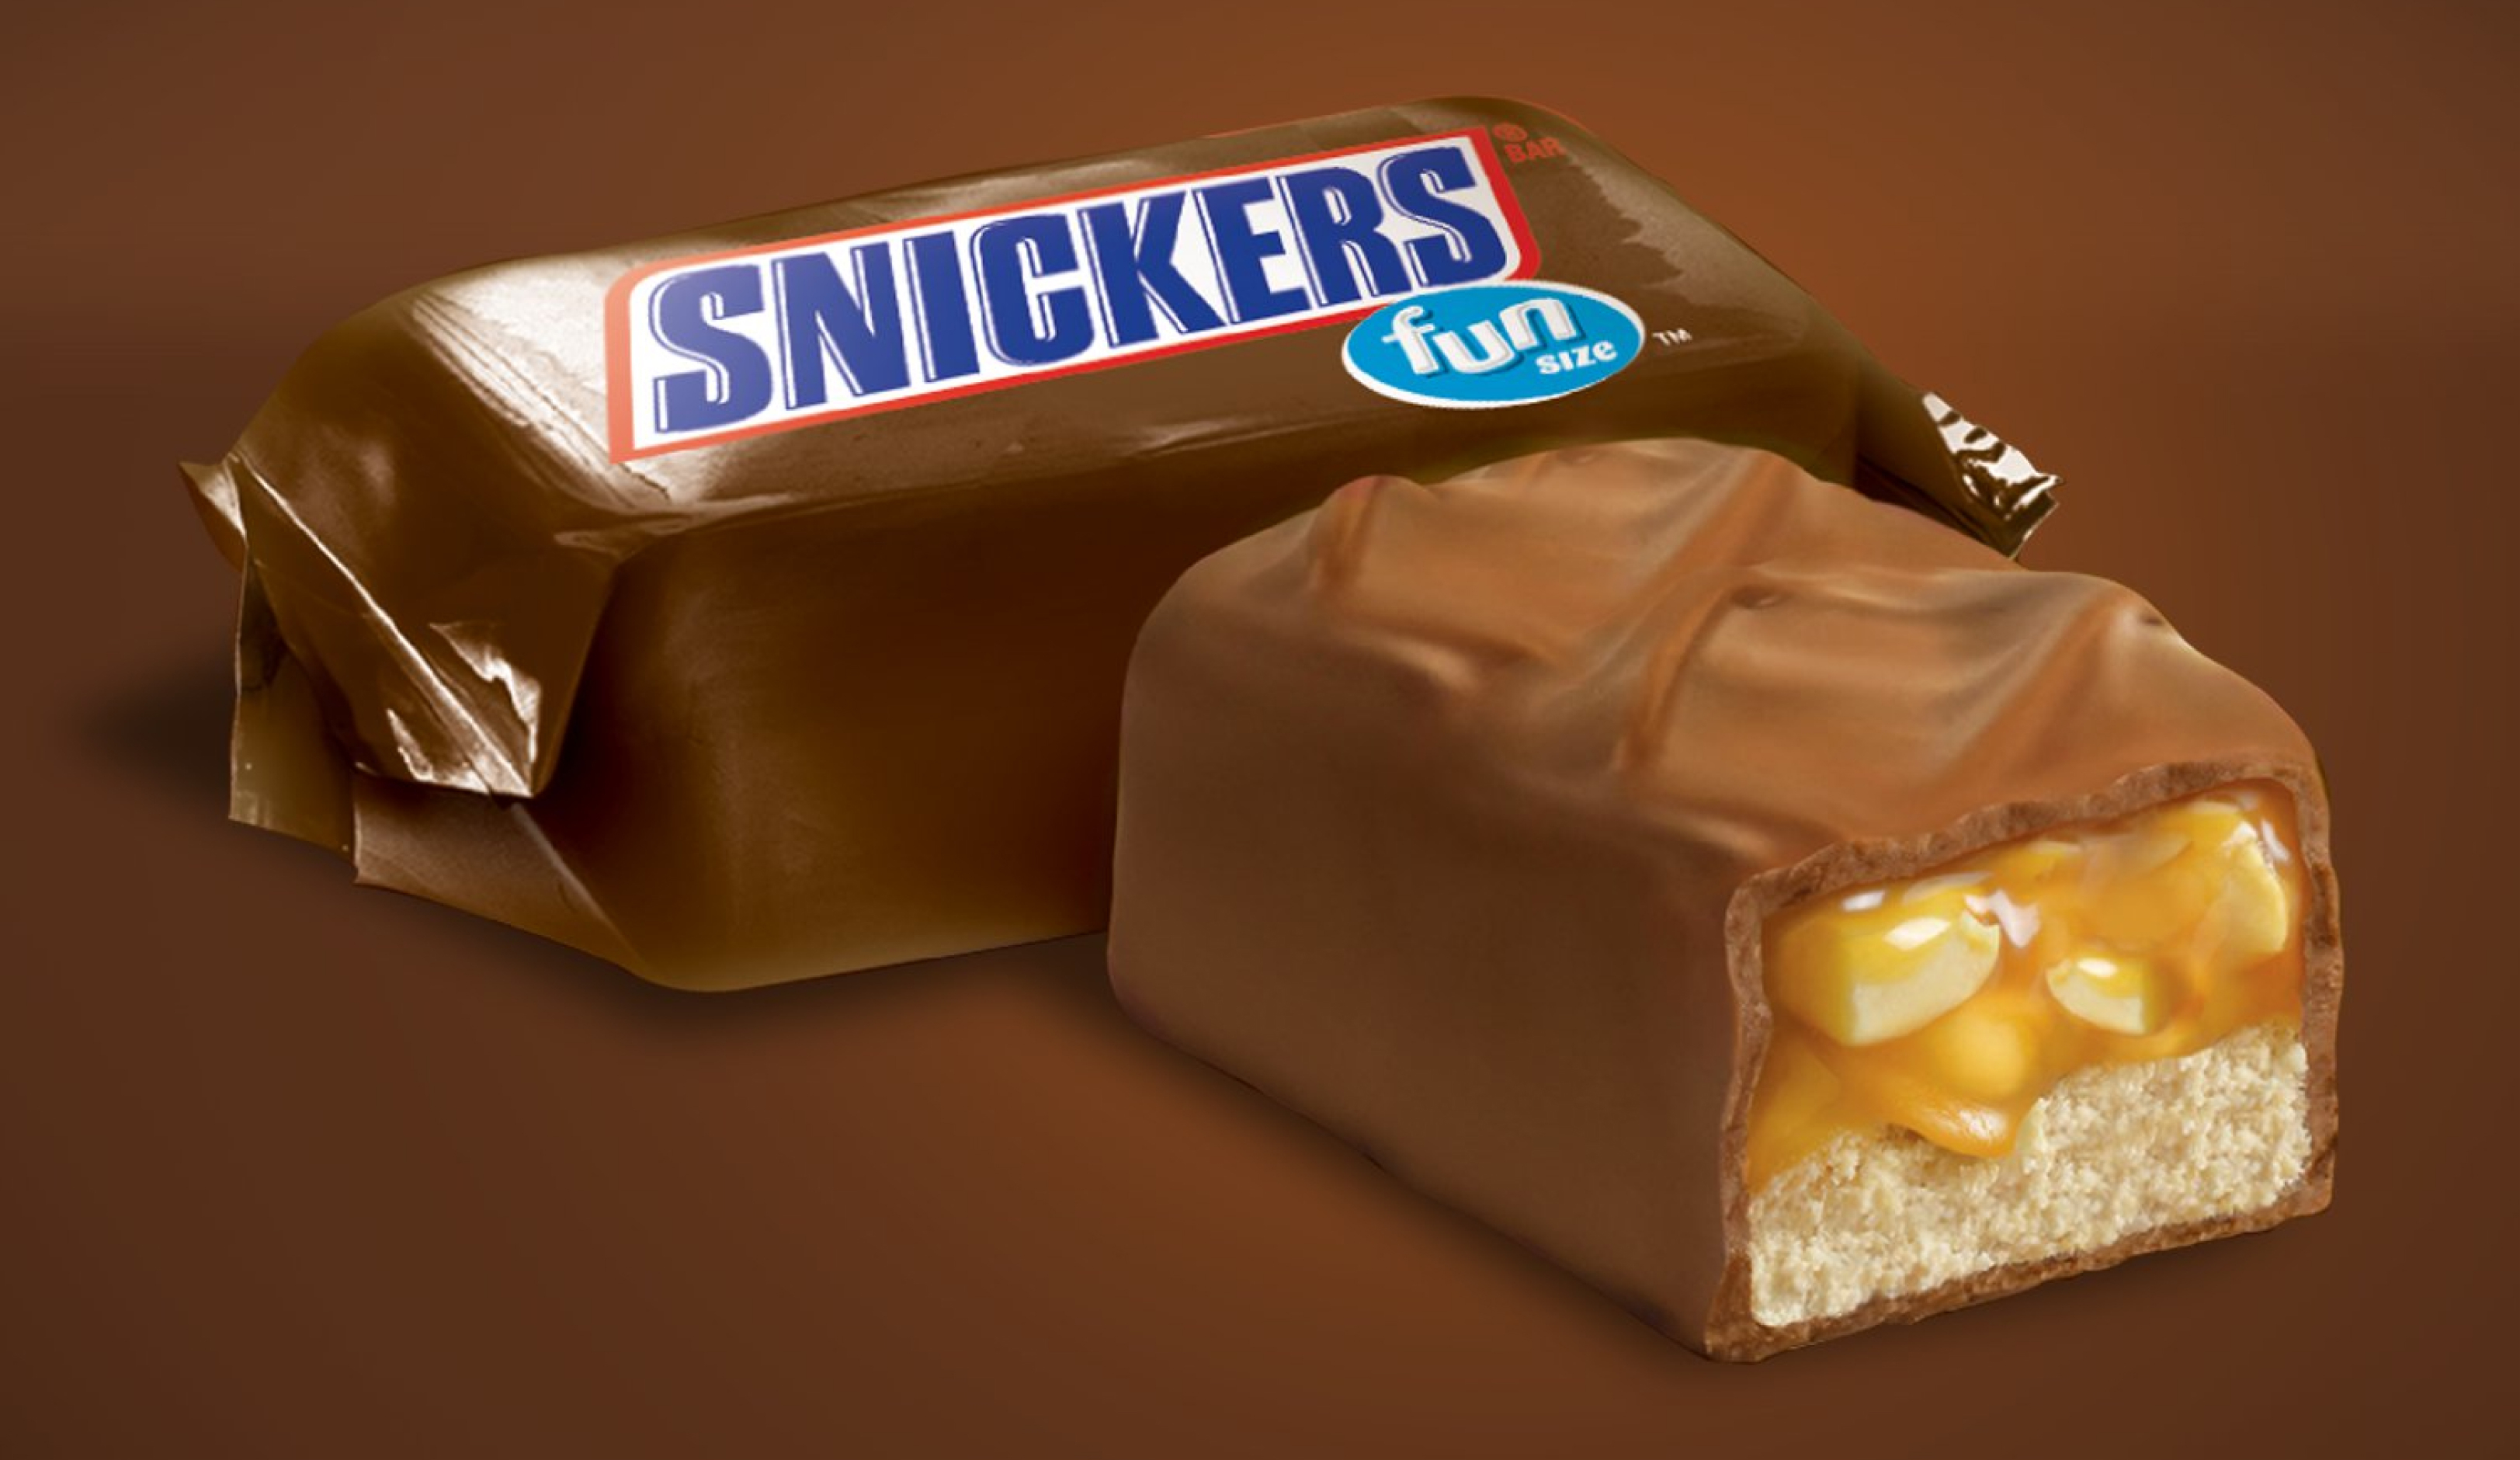 Cross-section of Snickers mini chocolate bar next to packaged mini bar